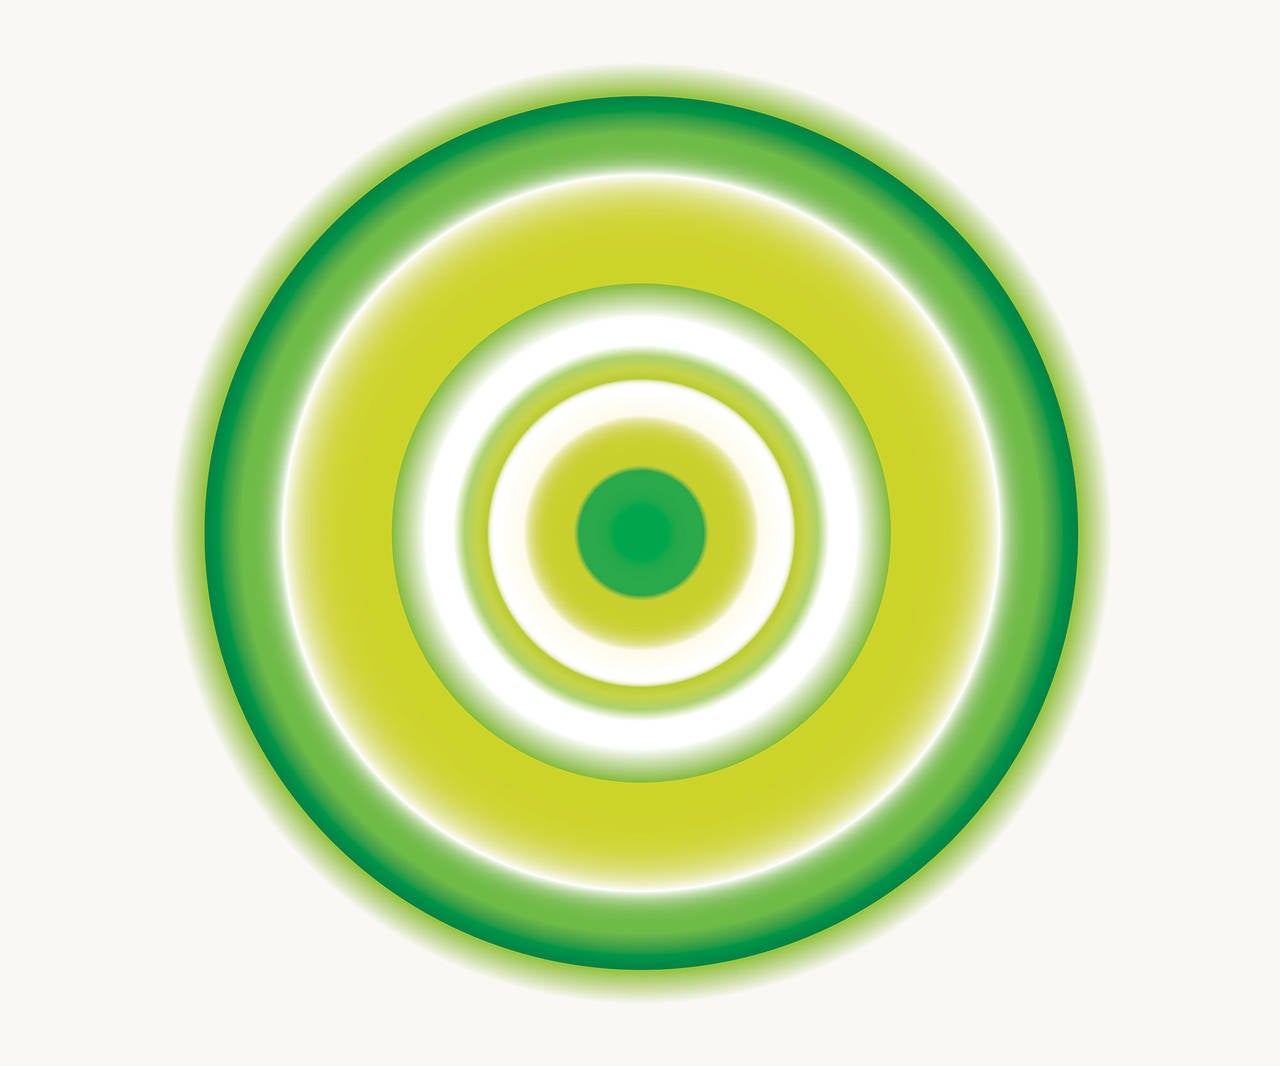 Green Circle on Beige - Print by Ruth Adler